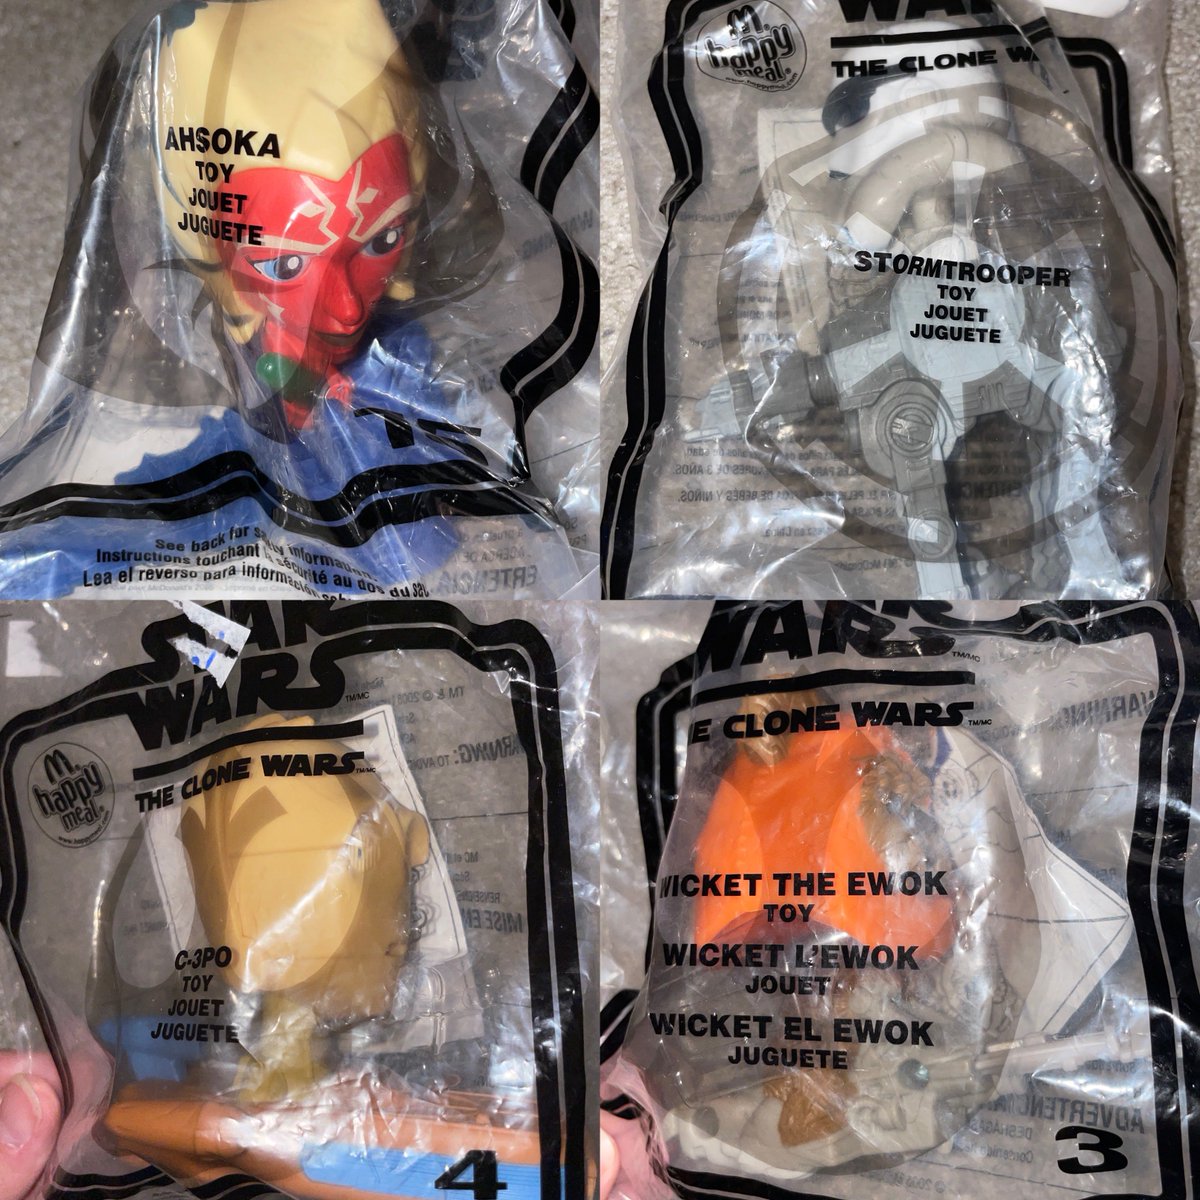 My parents found these Clone Wars happy meal toys from 2008 at a garage sale, still sealed! They were 50¢/1$ each, of course I told them to buy all of them for me🙏🏼😂 I wanna open them but I won’t😭
#ChicagoFunko #CloneWars #StarWars #HappyMeal #DarthVader #Ahsoka #CaptianRex